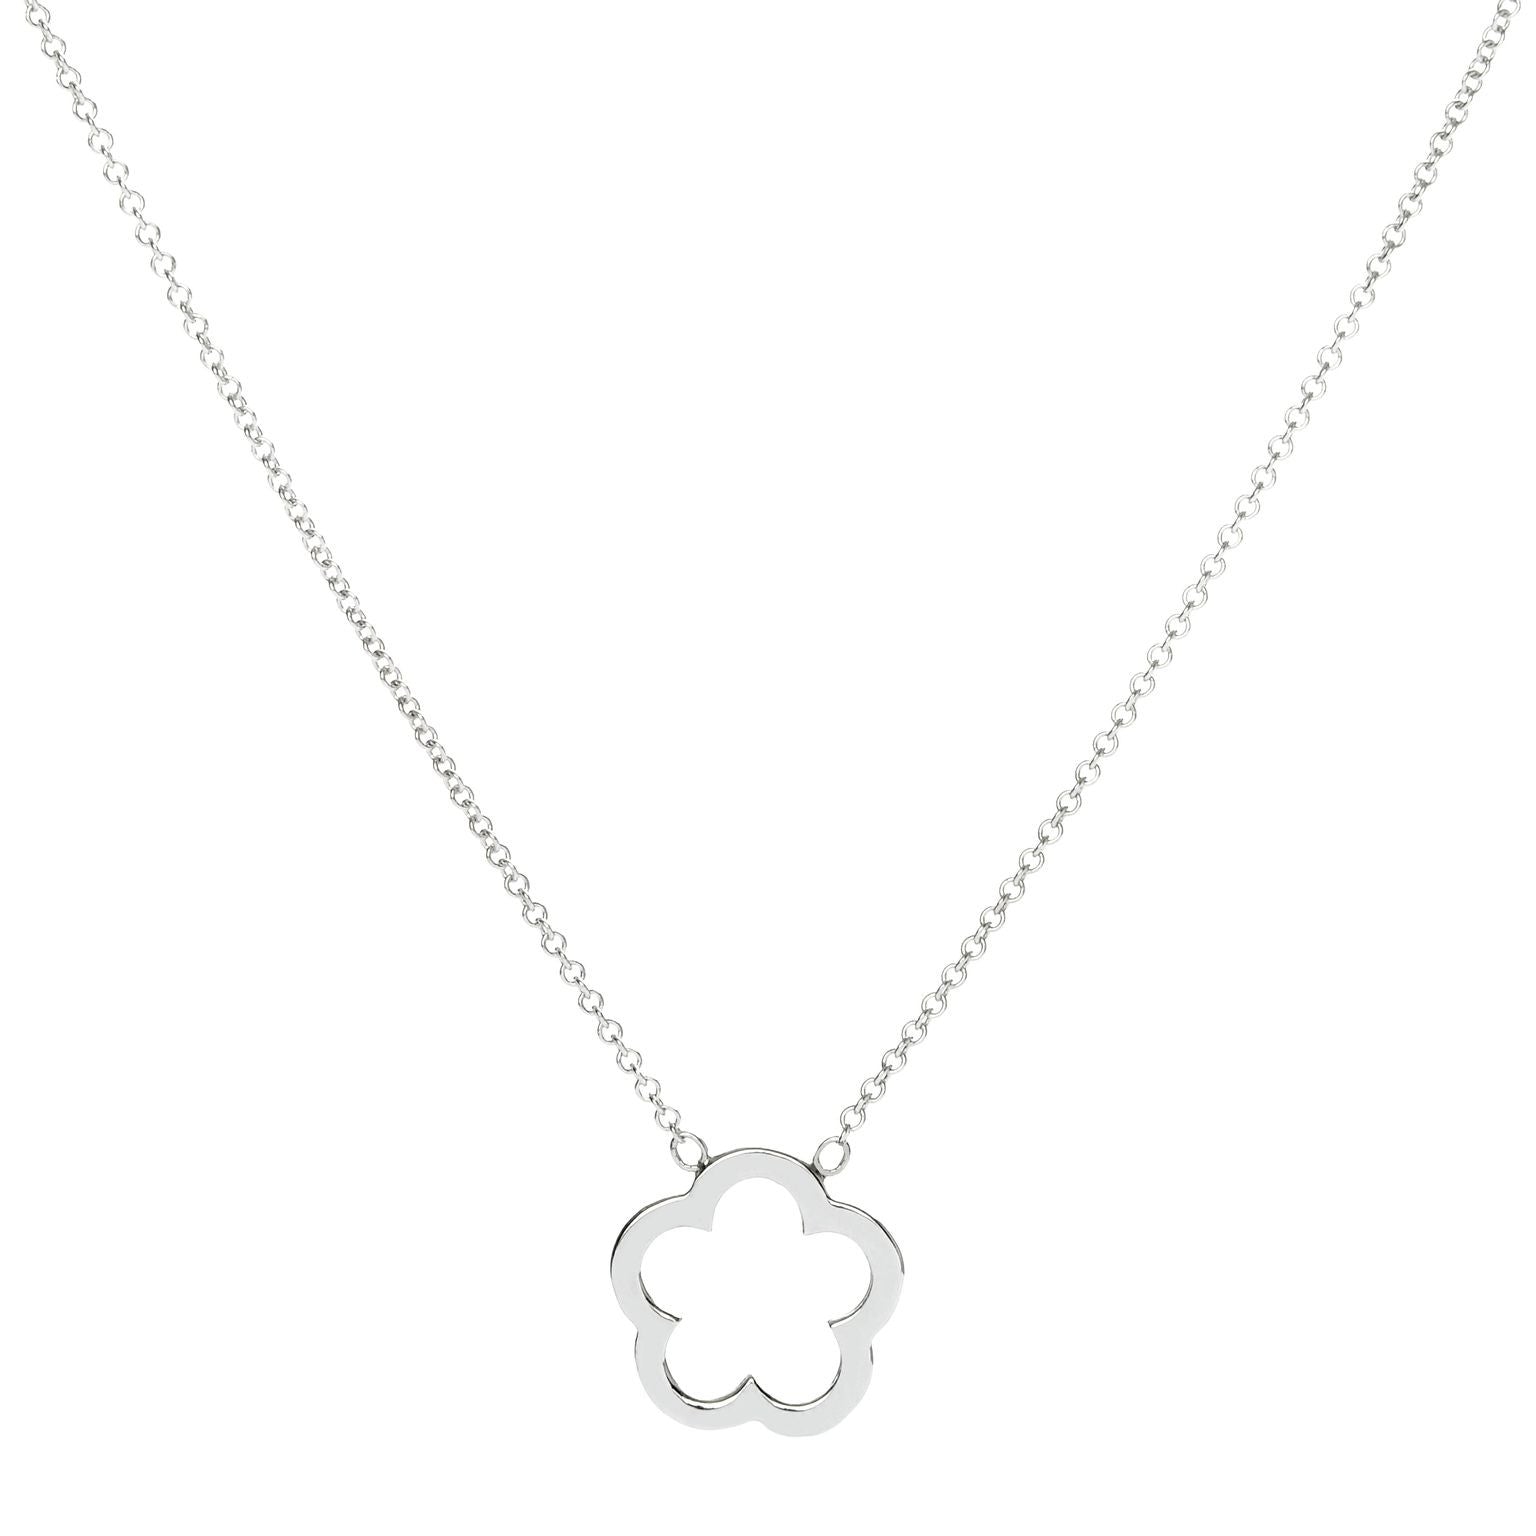 HAPPINESS Necklace